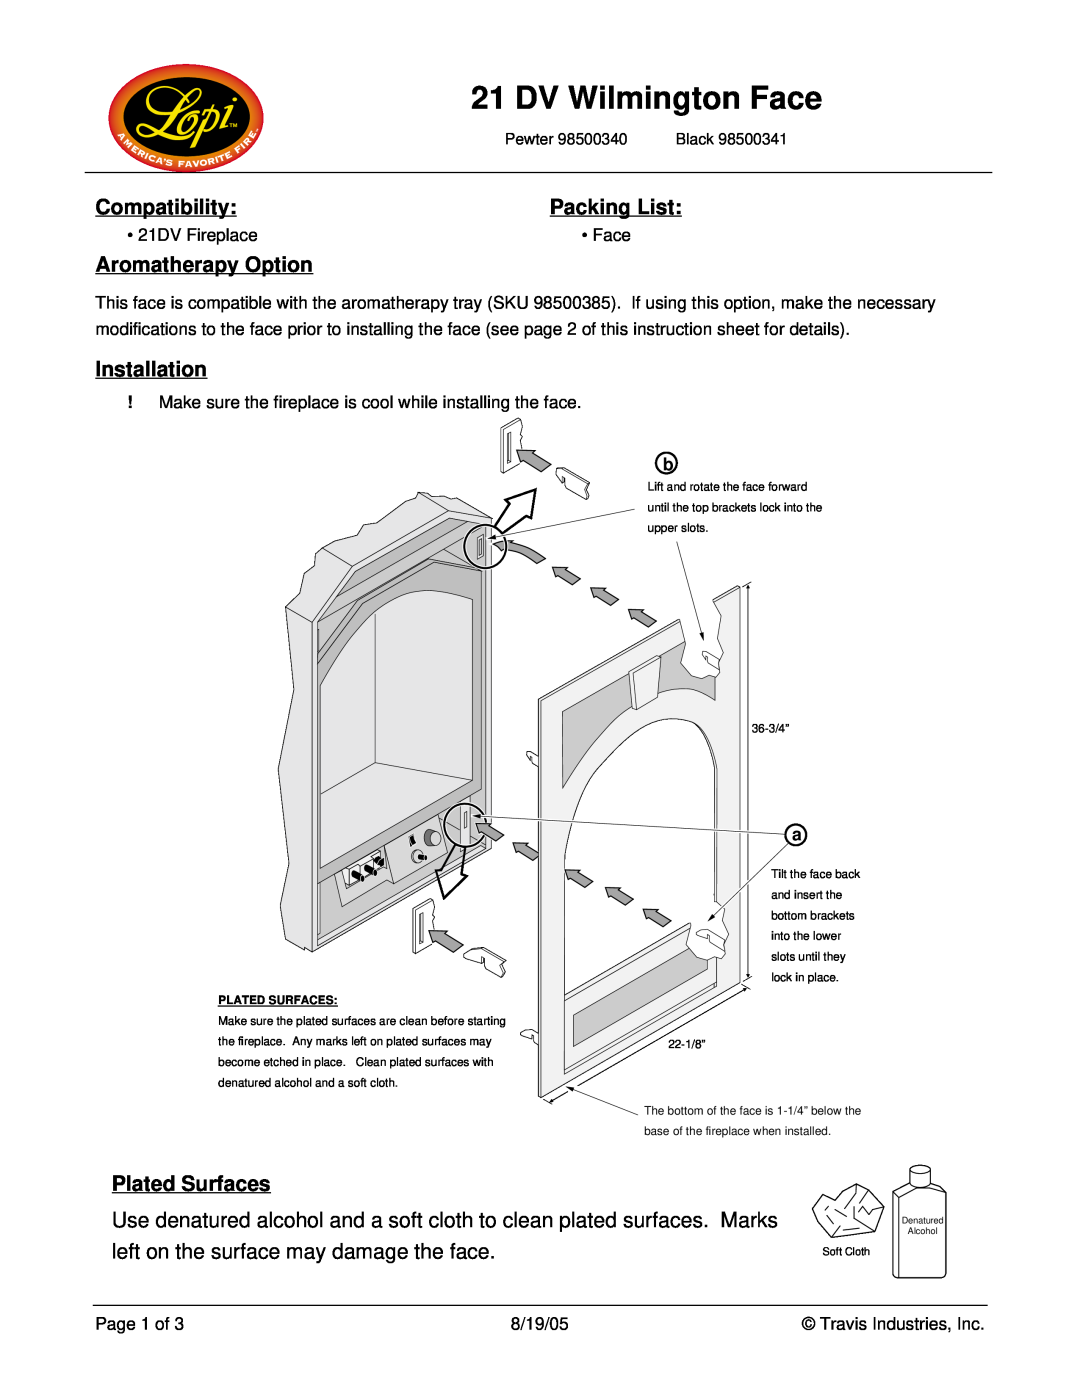 Lopi 98500340 instruction sheet Compatibility, Packing List, Aromatherapy Option, Installation, Plated Surfaces 